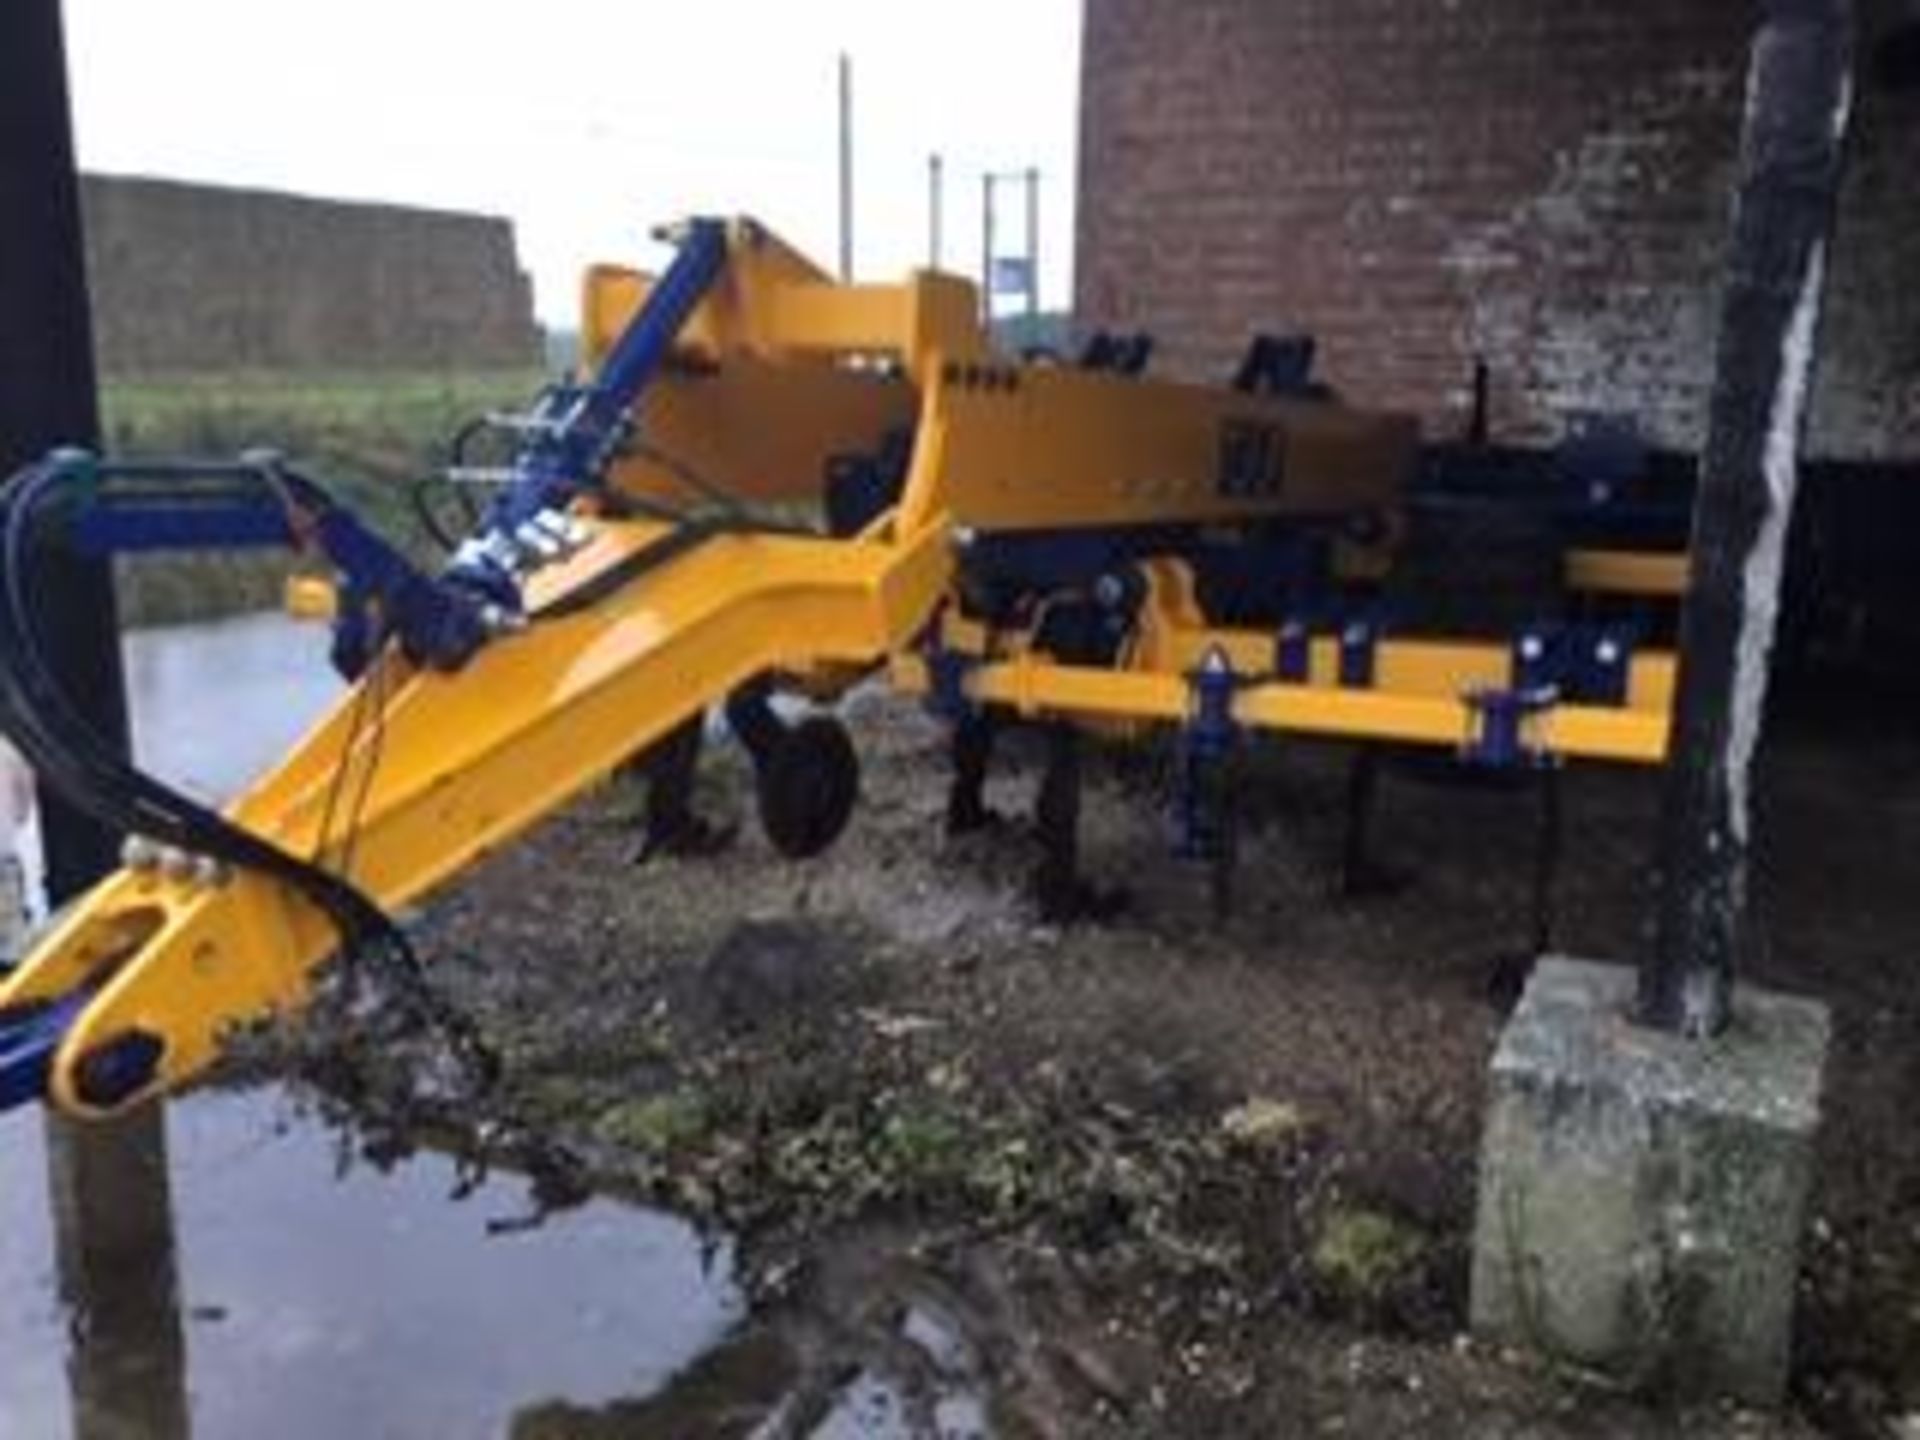 2015 TWB 4M TRAILED SUBSOILER, HYDRAULIC FOLDING, FRONT CUTTING DISCS, DOUBLE DD REAR PACKER - Image 12 of 19